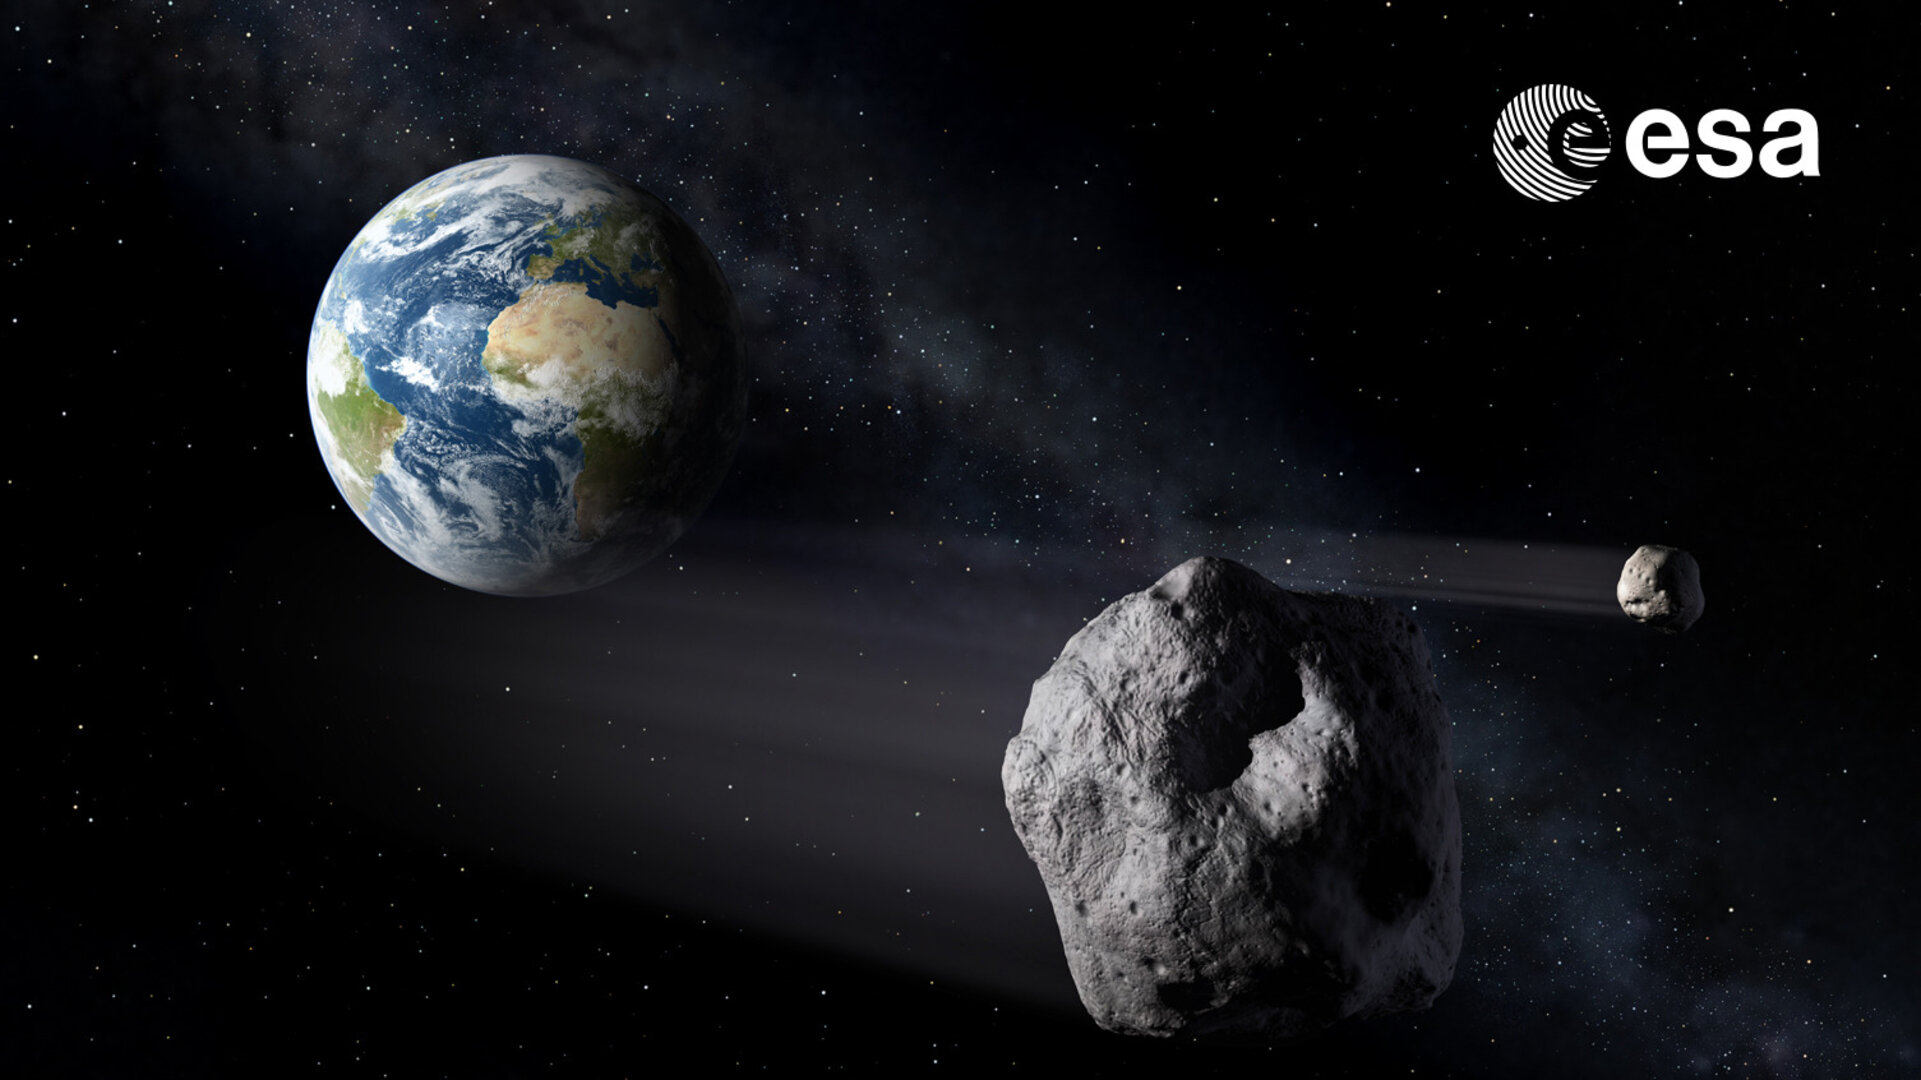 Asteroids passing Earth